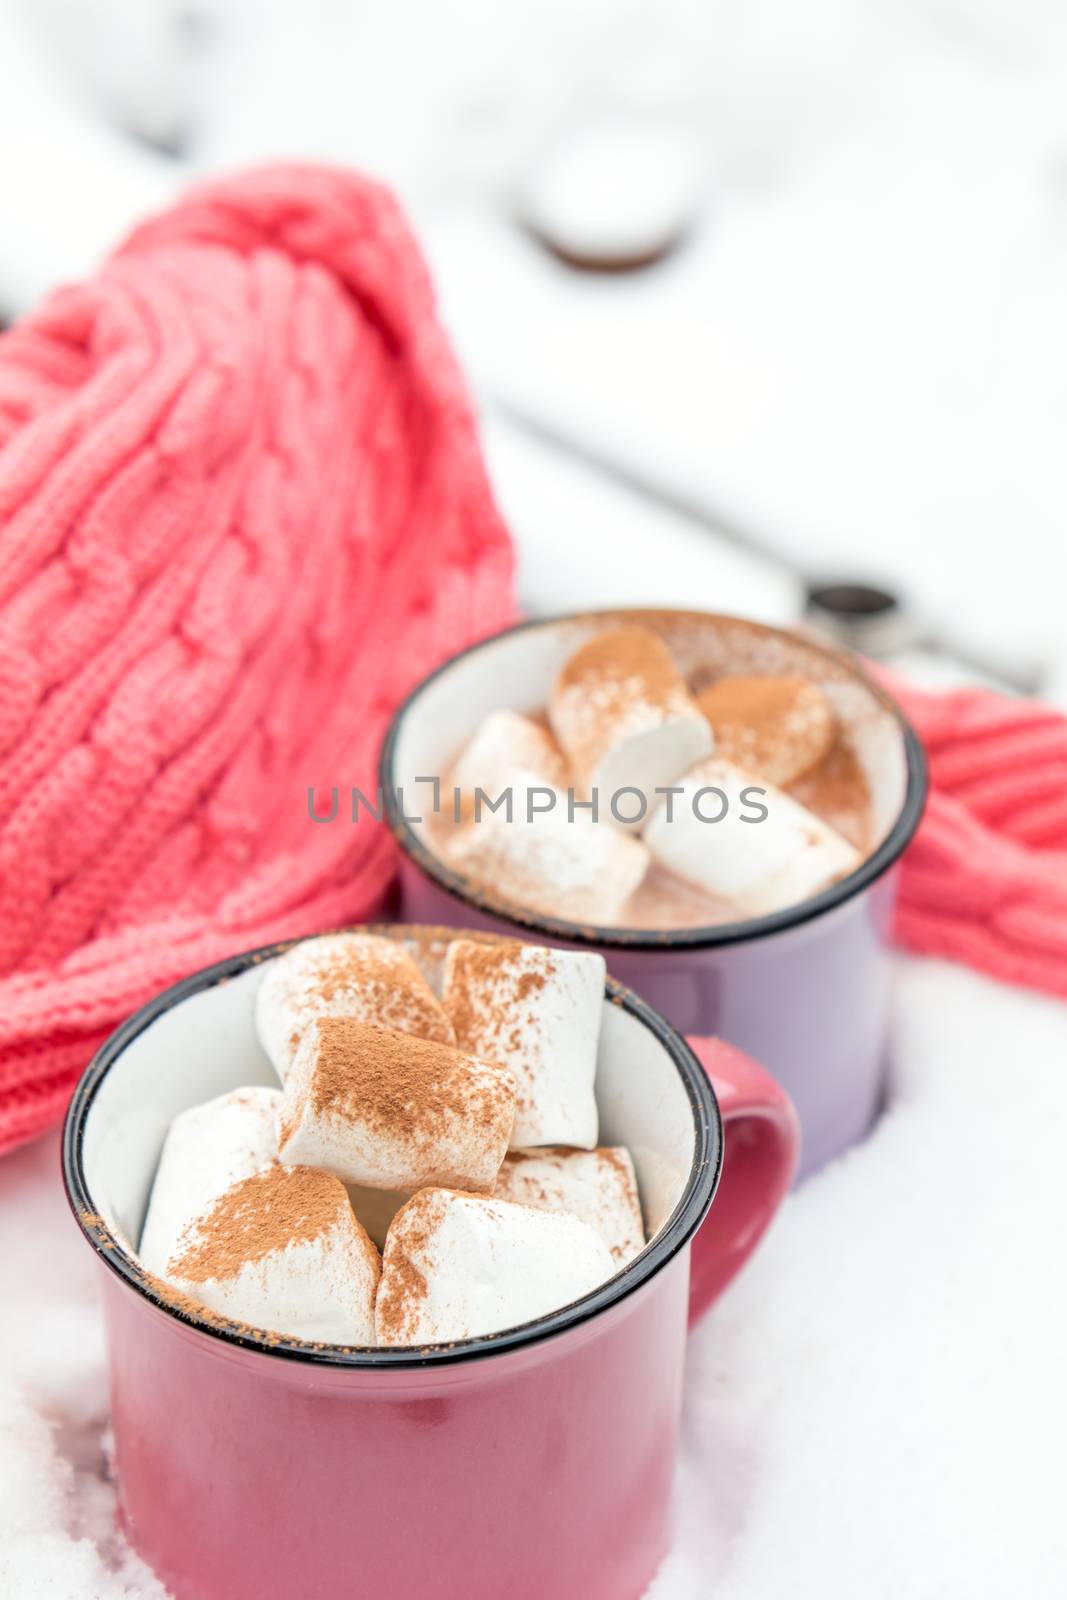 Hot chocolate with marshmallow in pink and violet two cups wrapped in a cozy winter pink scarf on the snow-covered table in the garden. Coloring and processing photo, small depth of field